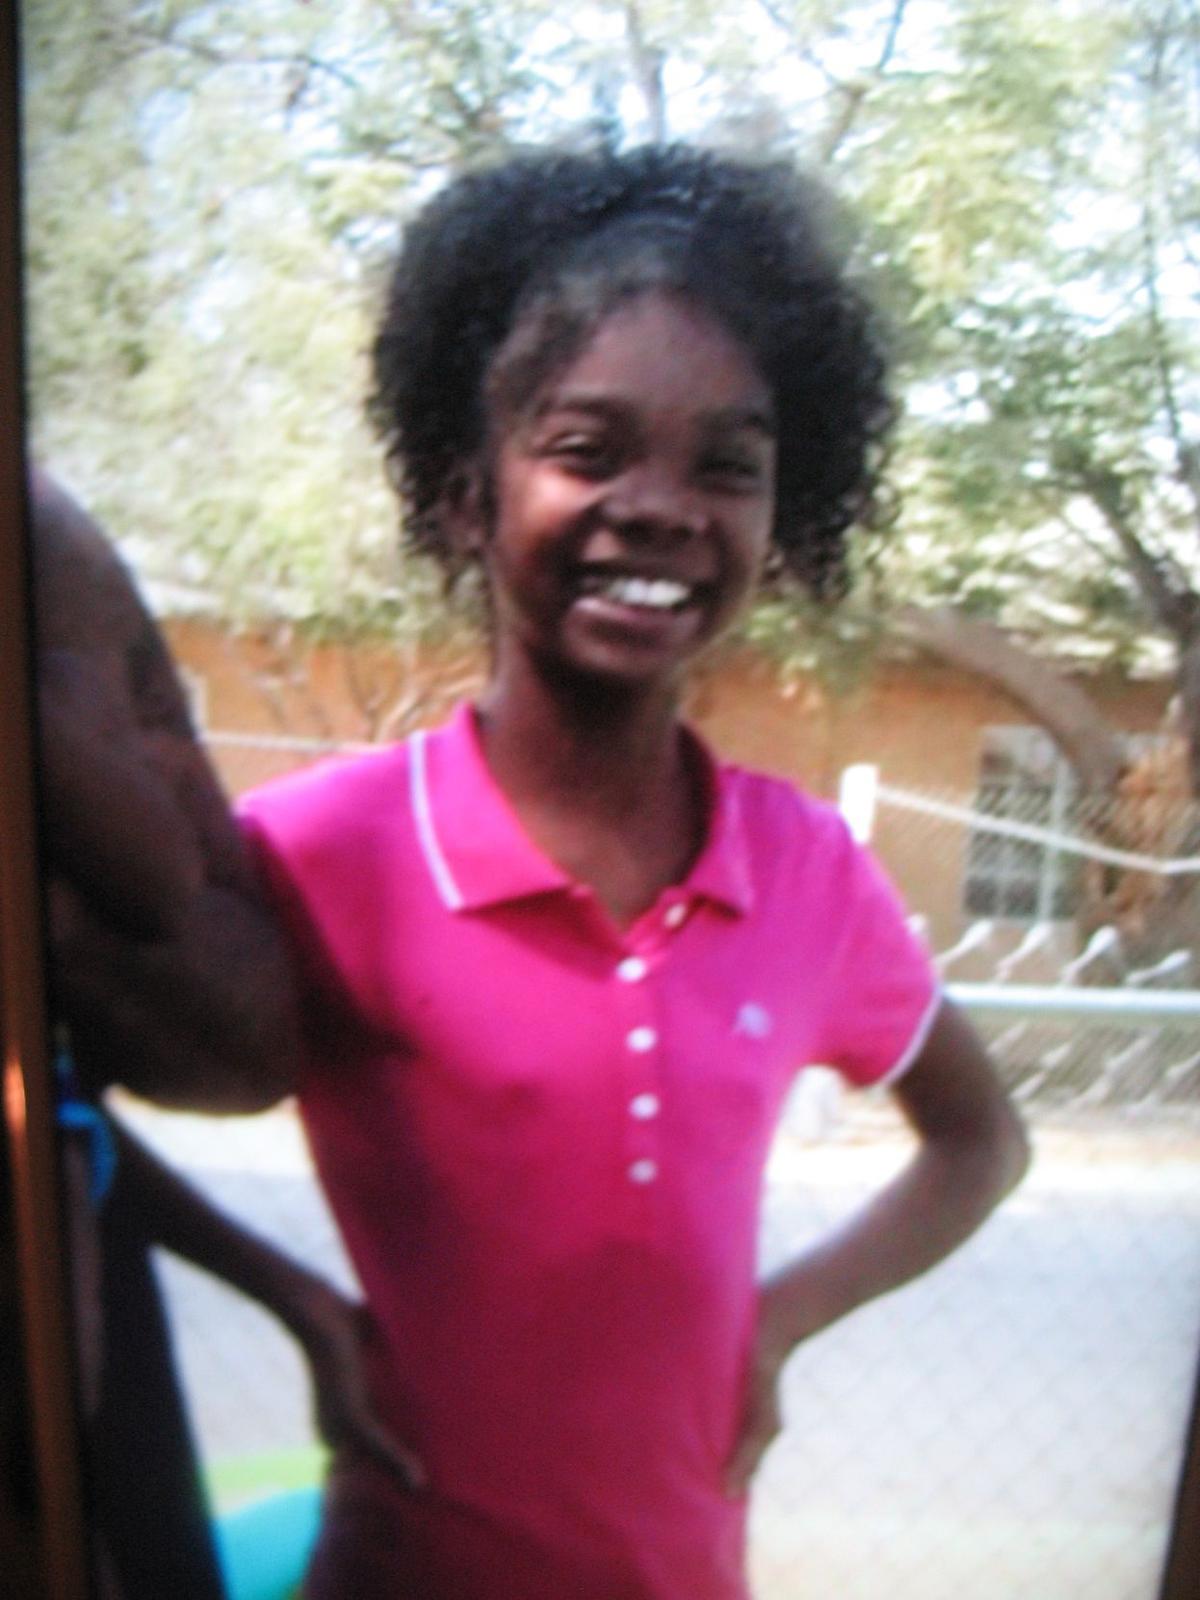 Bpd Has Found 12 Year Old Girl Who Went Missing Wednesday Breaking 